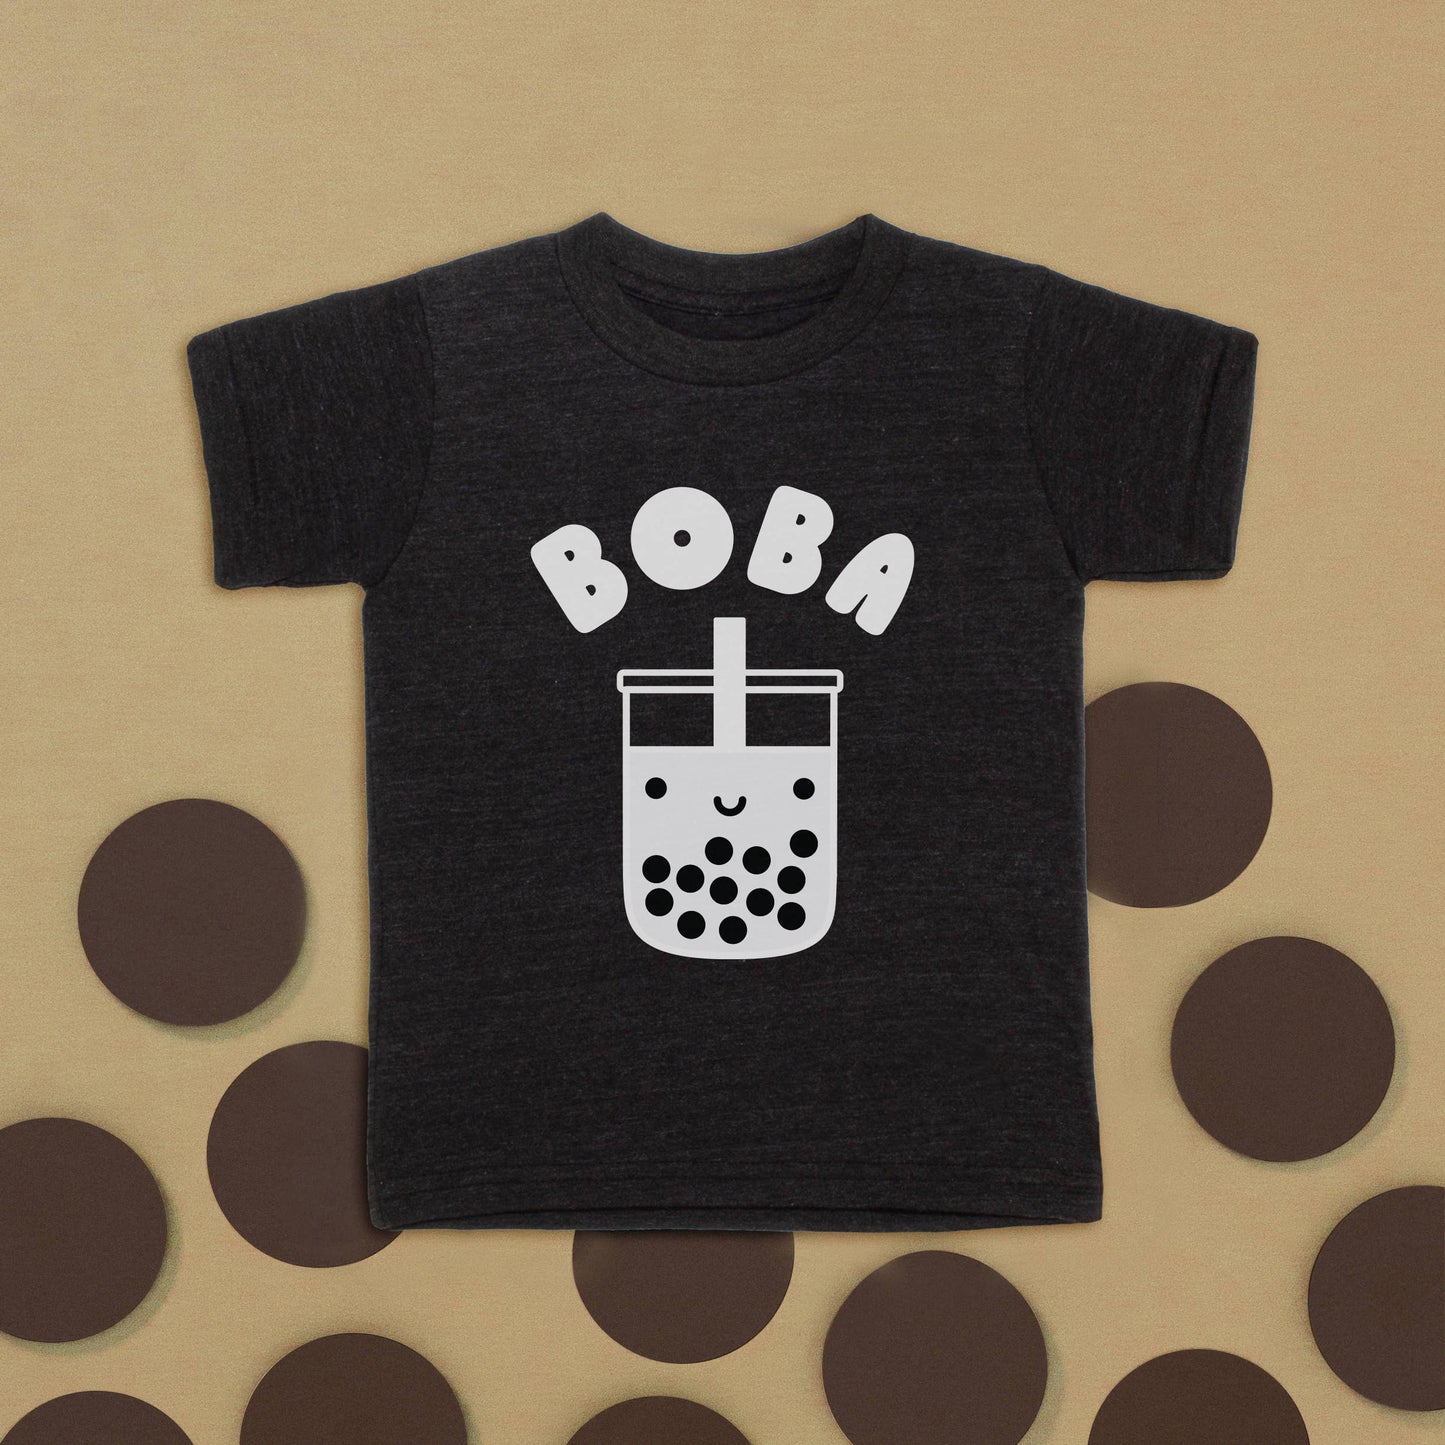 Black boba t-shirt for kids. Says boba across the chest with a smiley boba cup image. All in white ink 